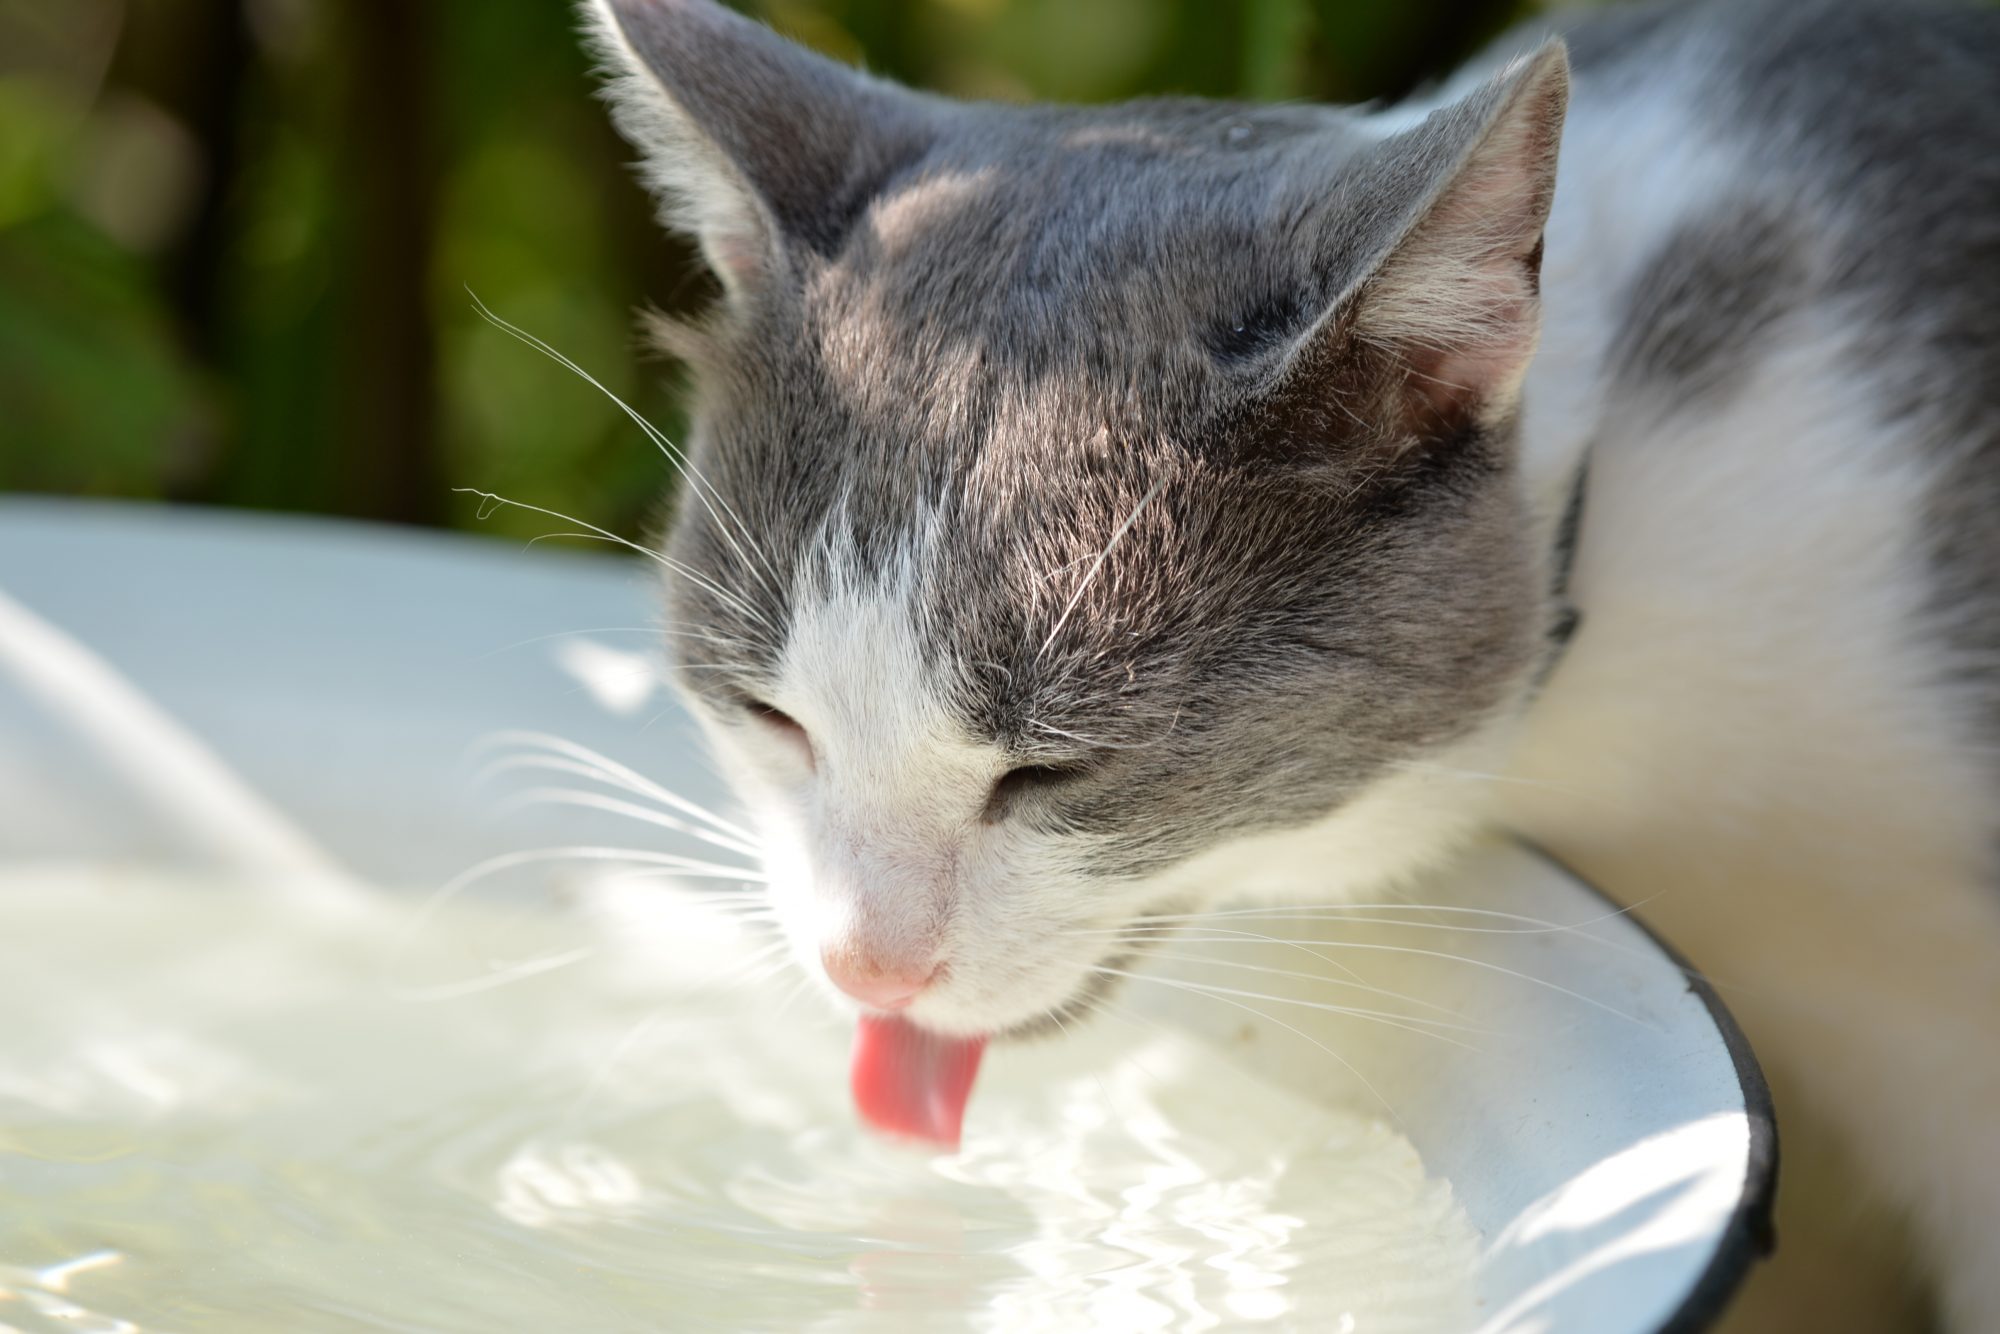 A cat drinking from a bowl.